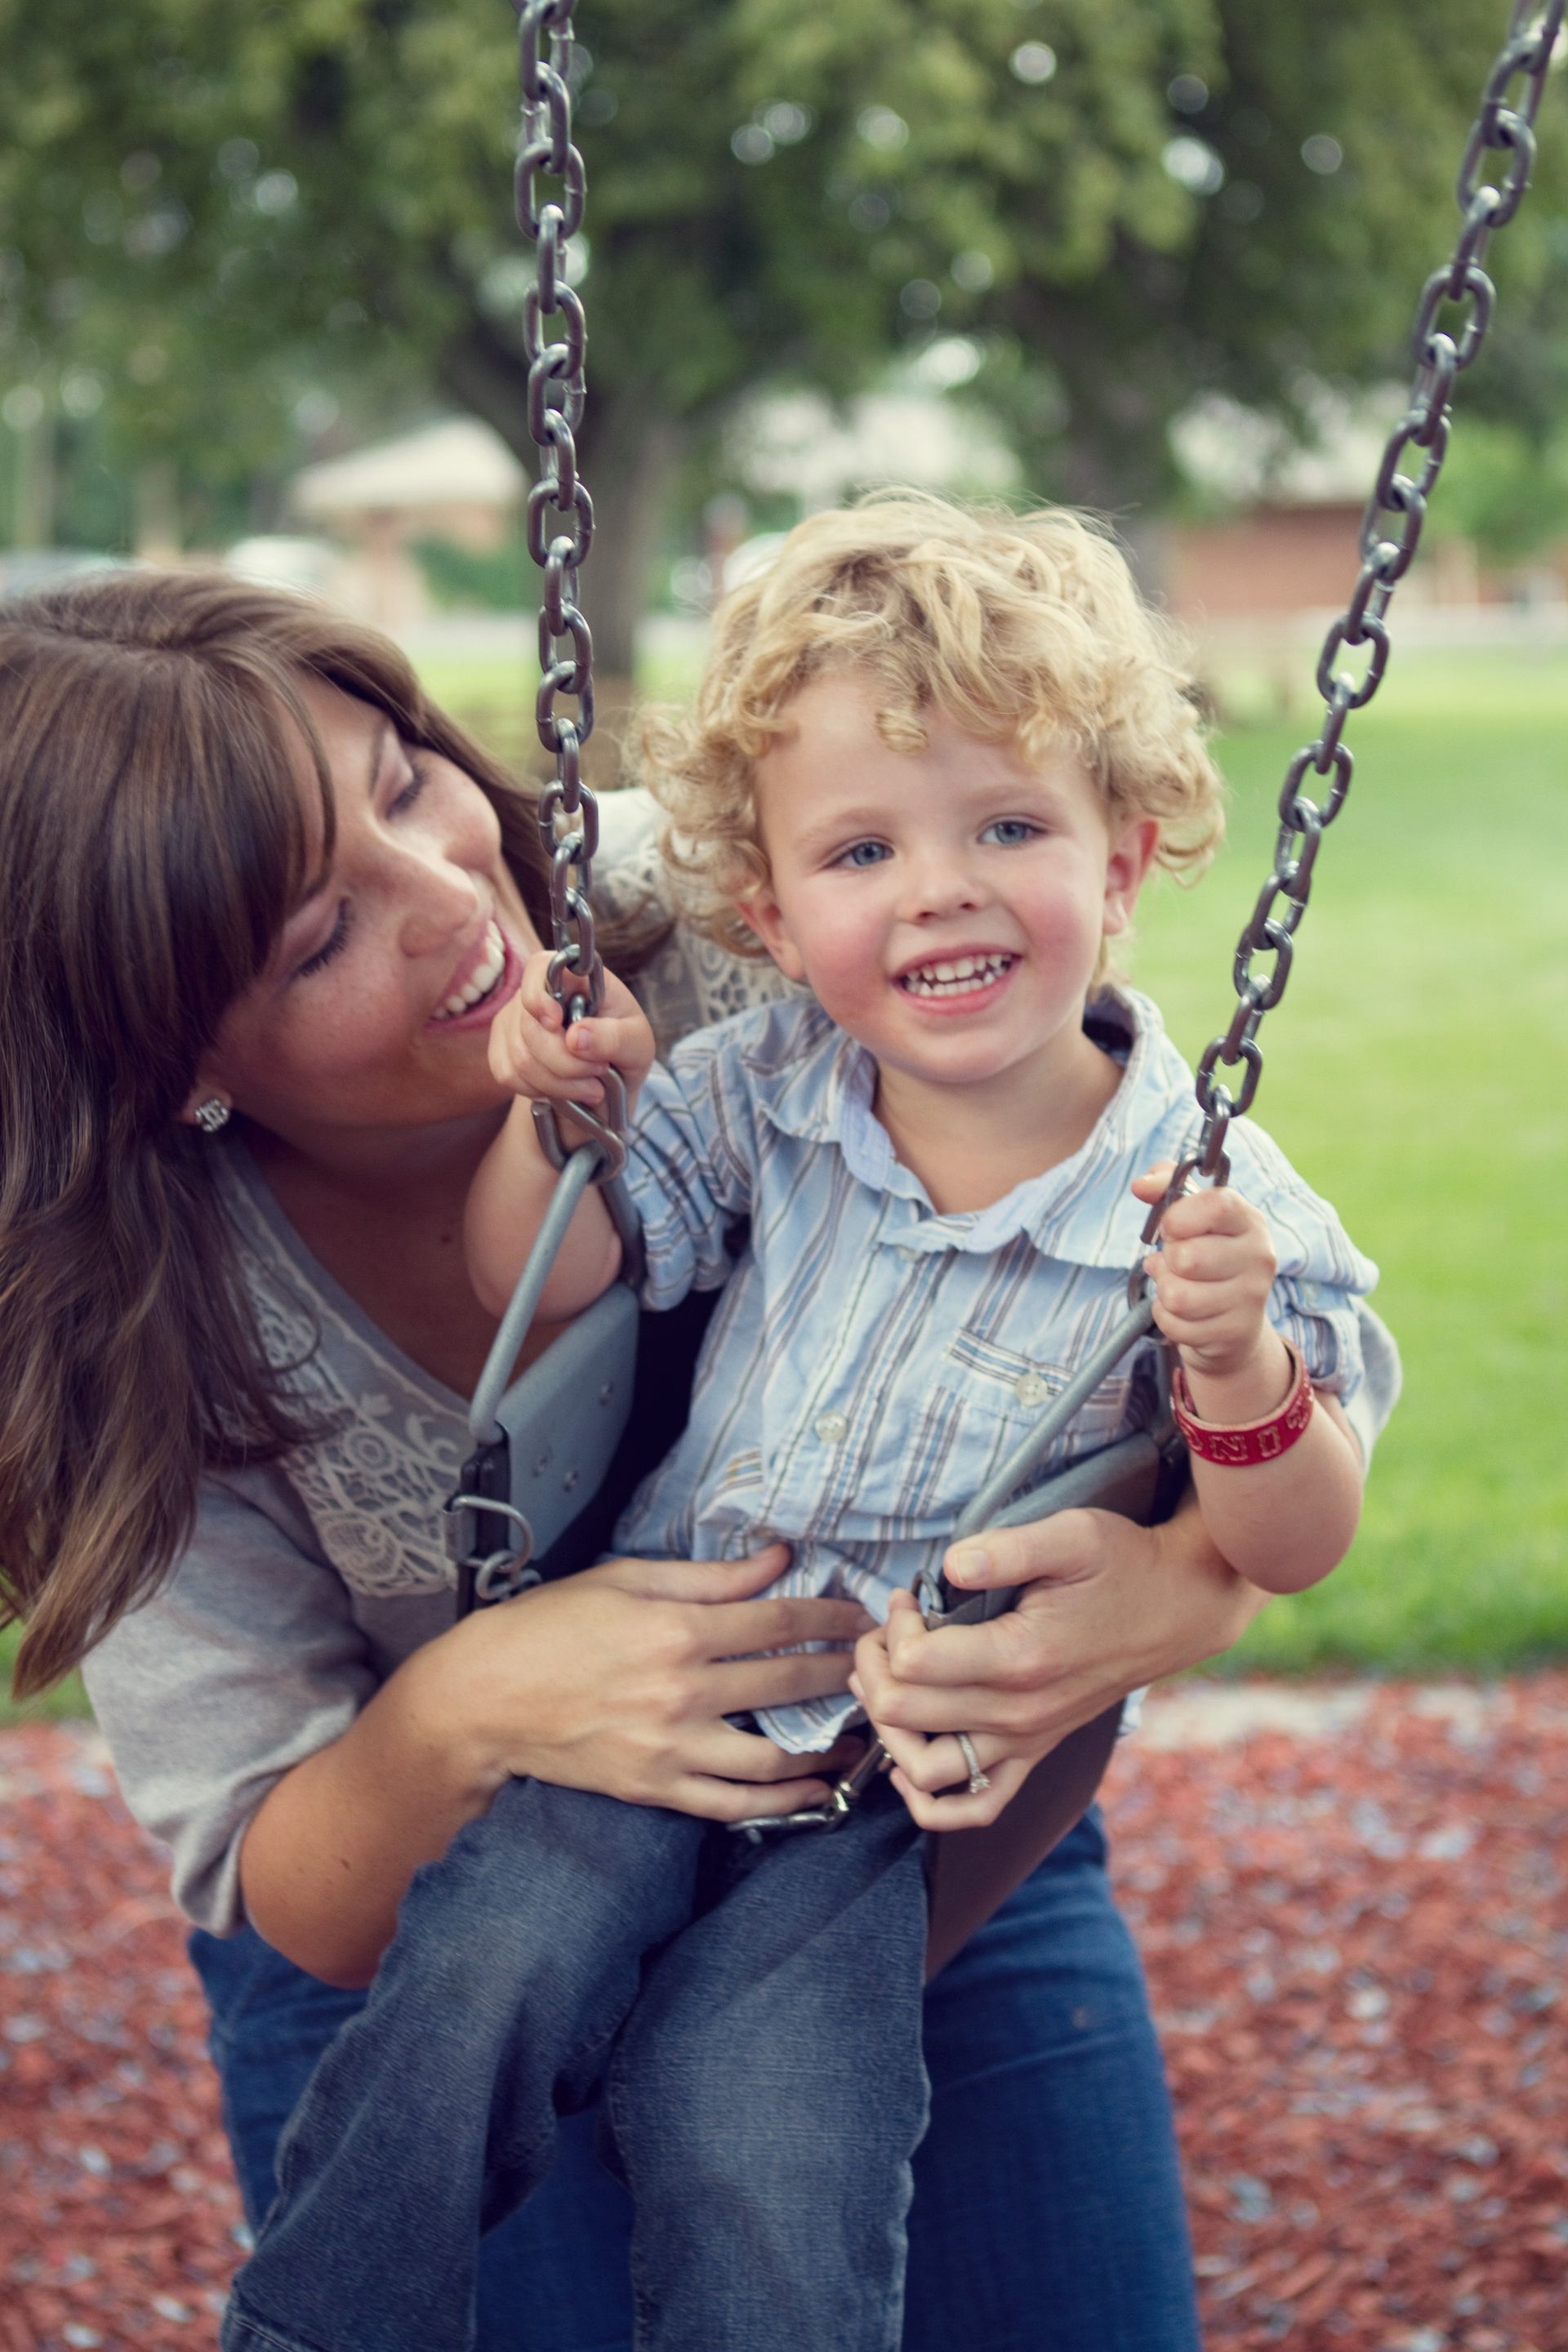 A mother pushes her son on the swing.